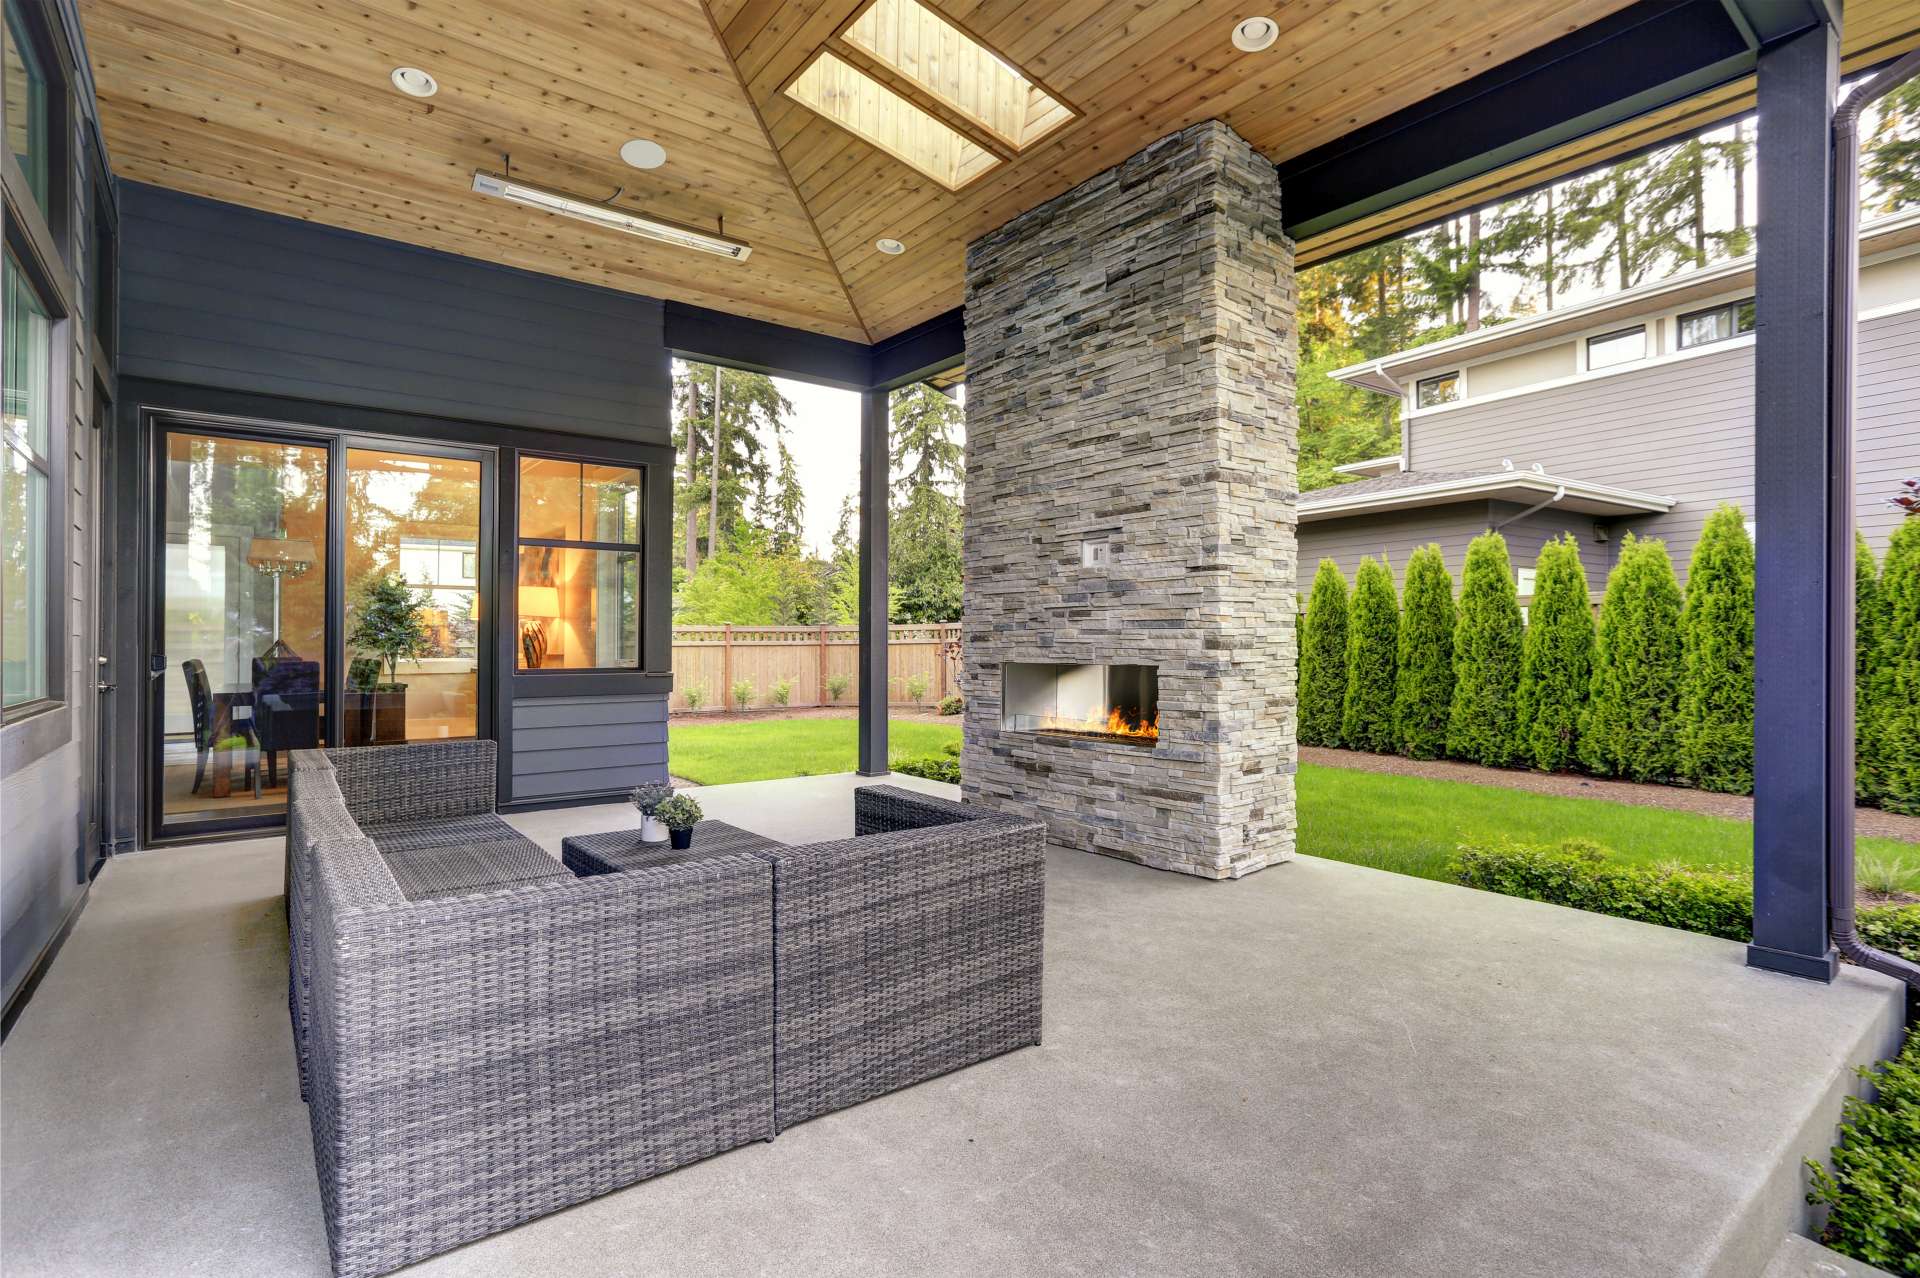 New Modern Home Features a Backyard with Patio